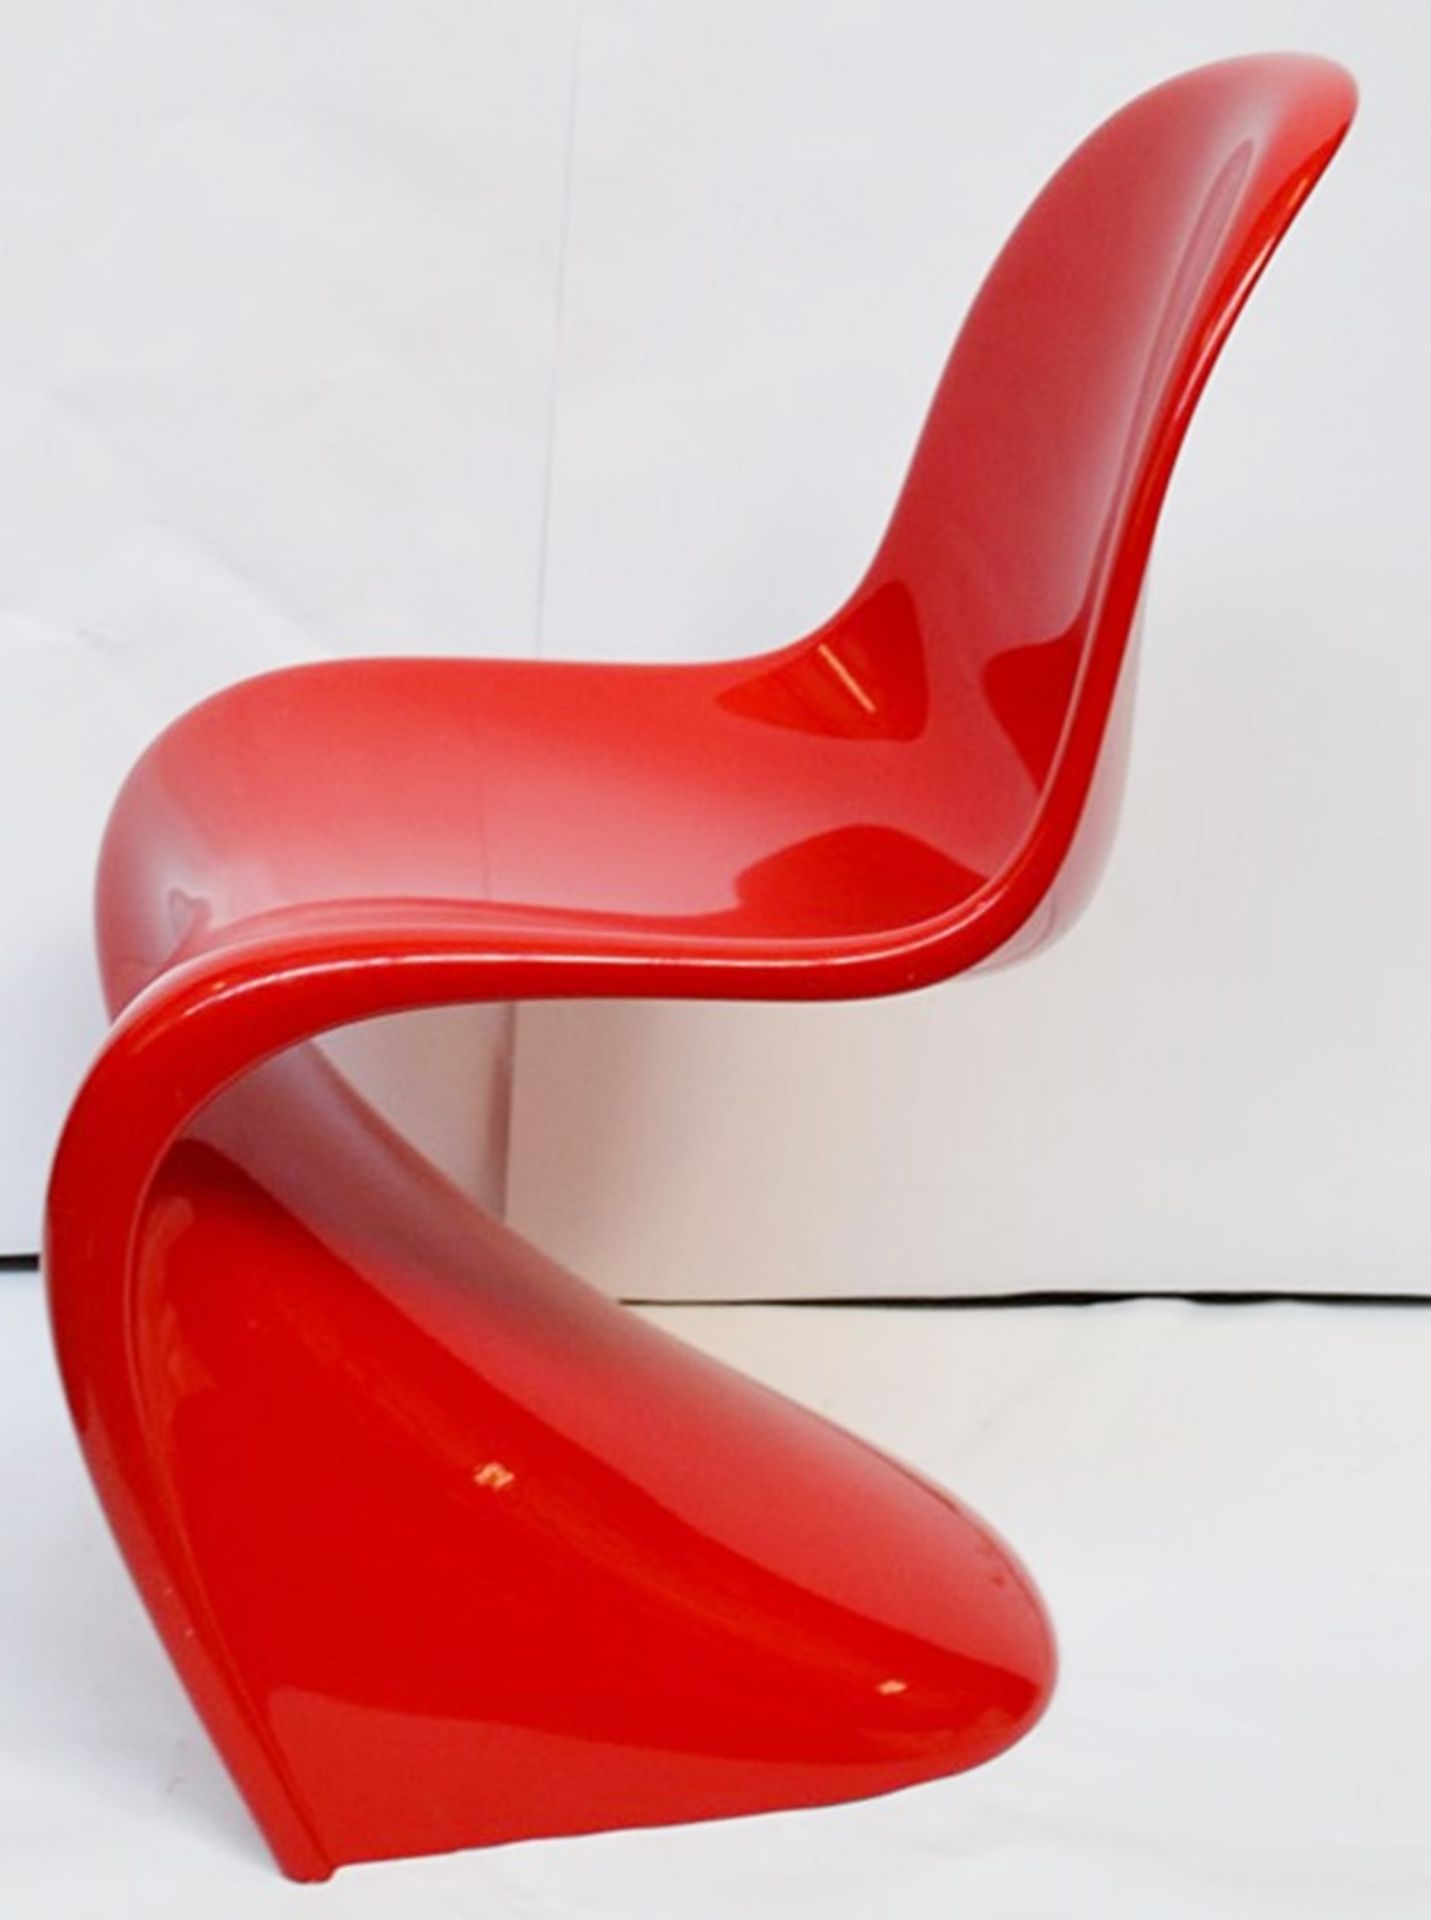 1 x VITRA Panton Chair In Classic Red - Measurements: W50 x D60 x H83cm, Seat Height: 41cm - - Image 8 of 8